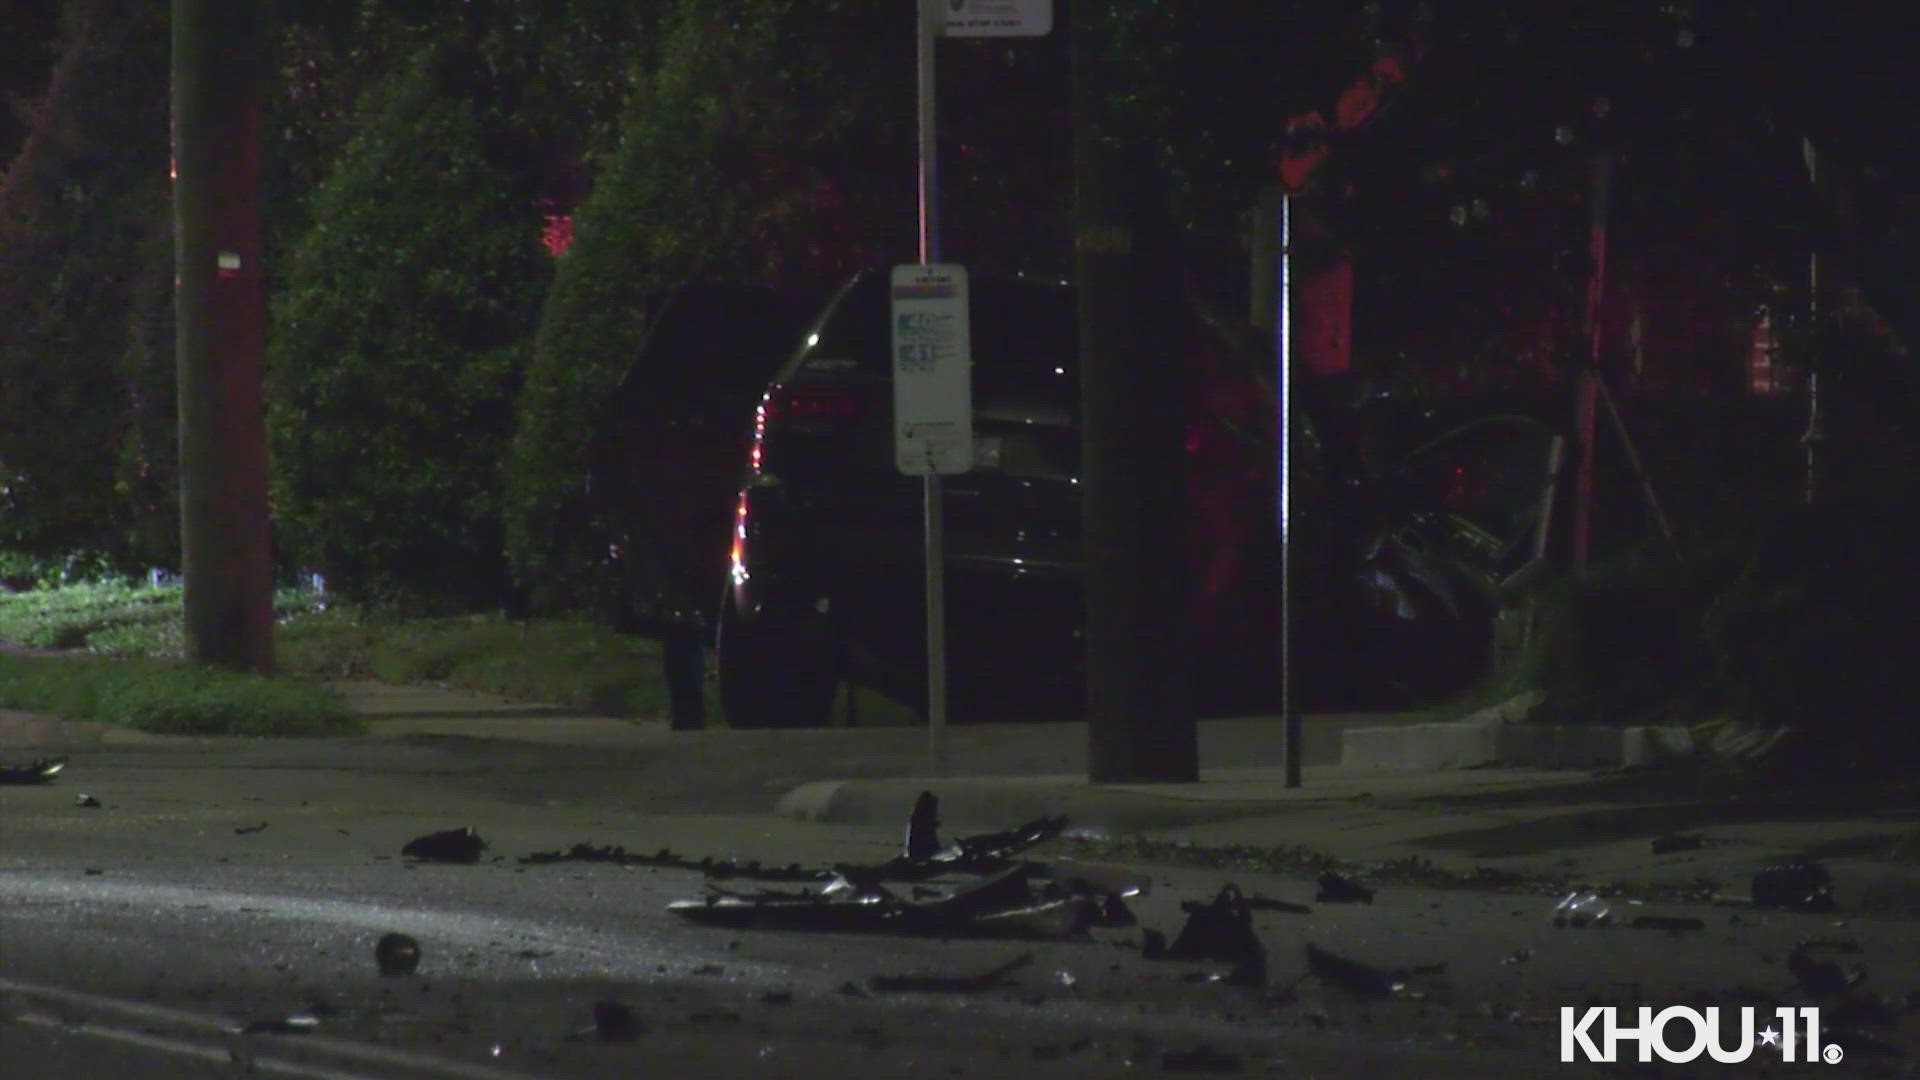 Houston police say four people were inside a Maserati when it collided with a Jeep and lost control.